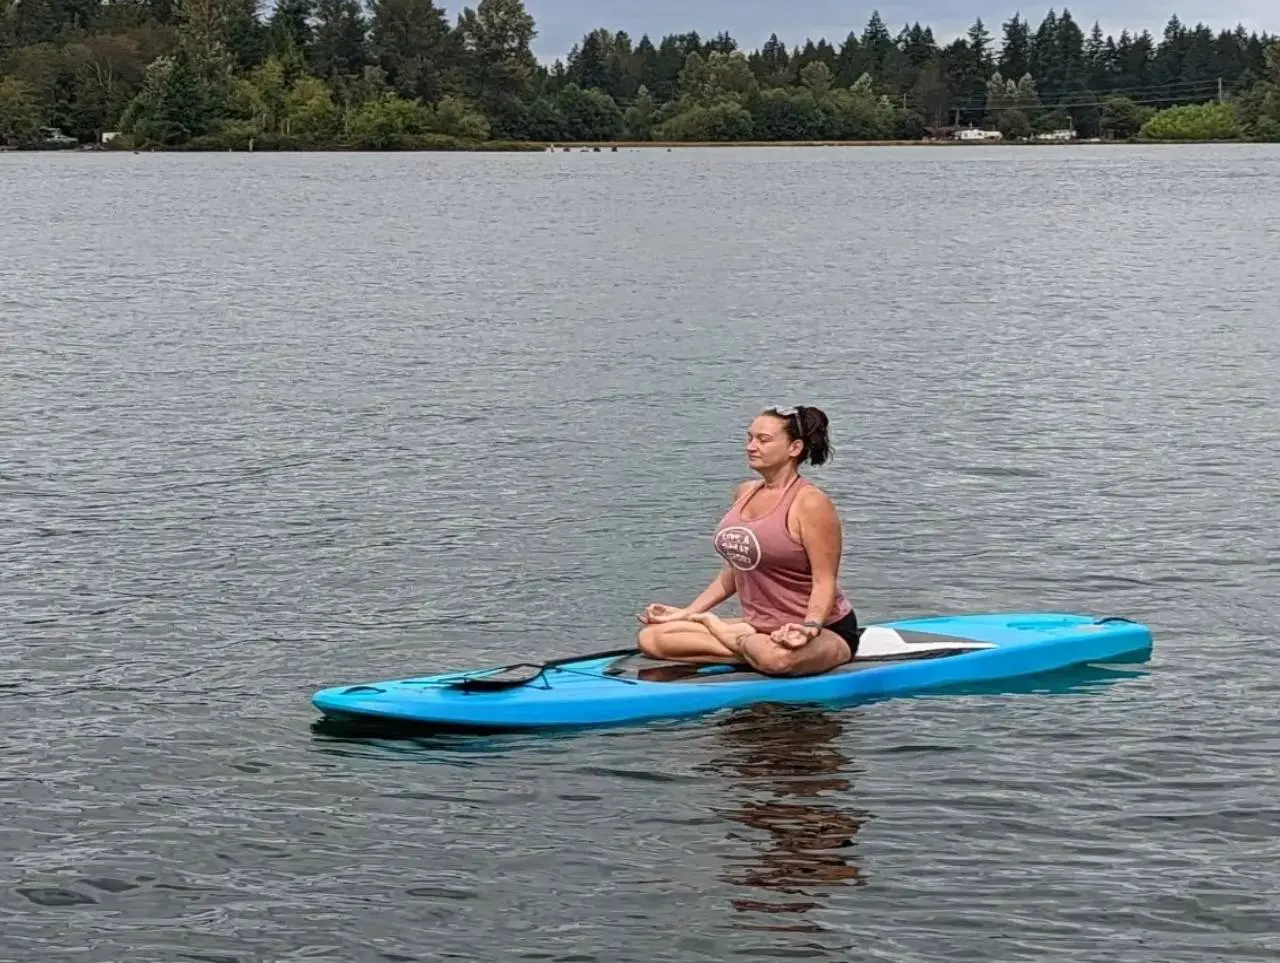 A Woman Meditating on a Blue Surf Boat